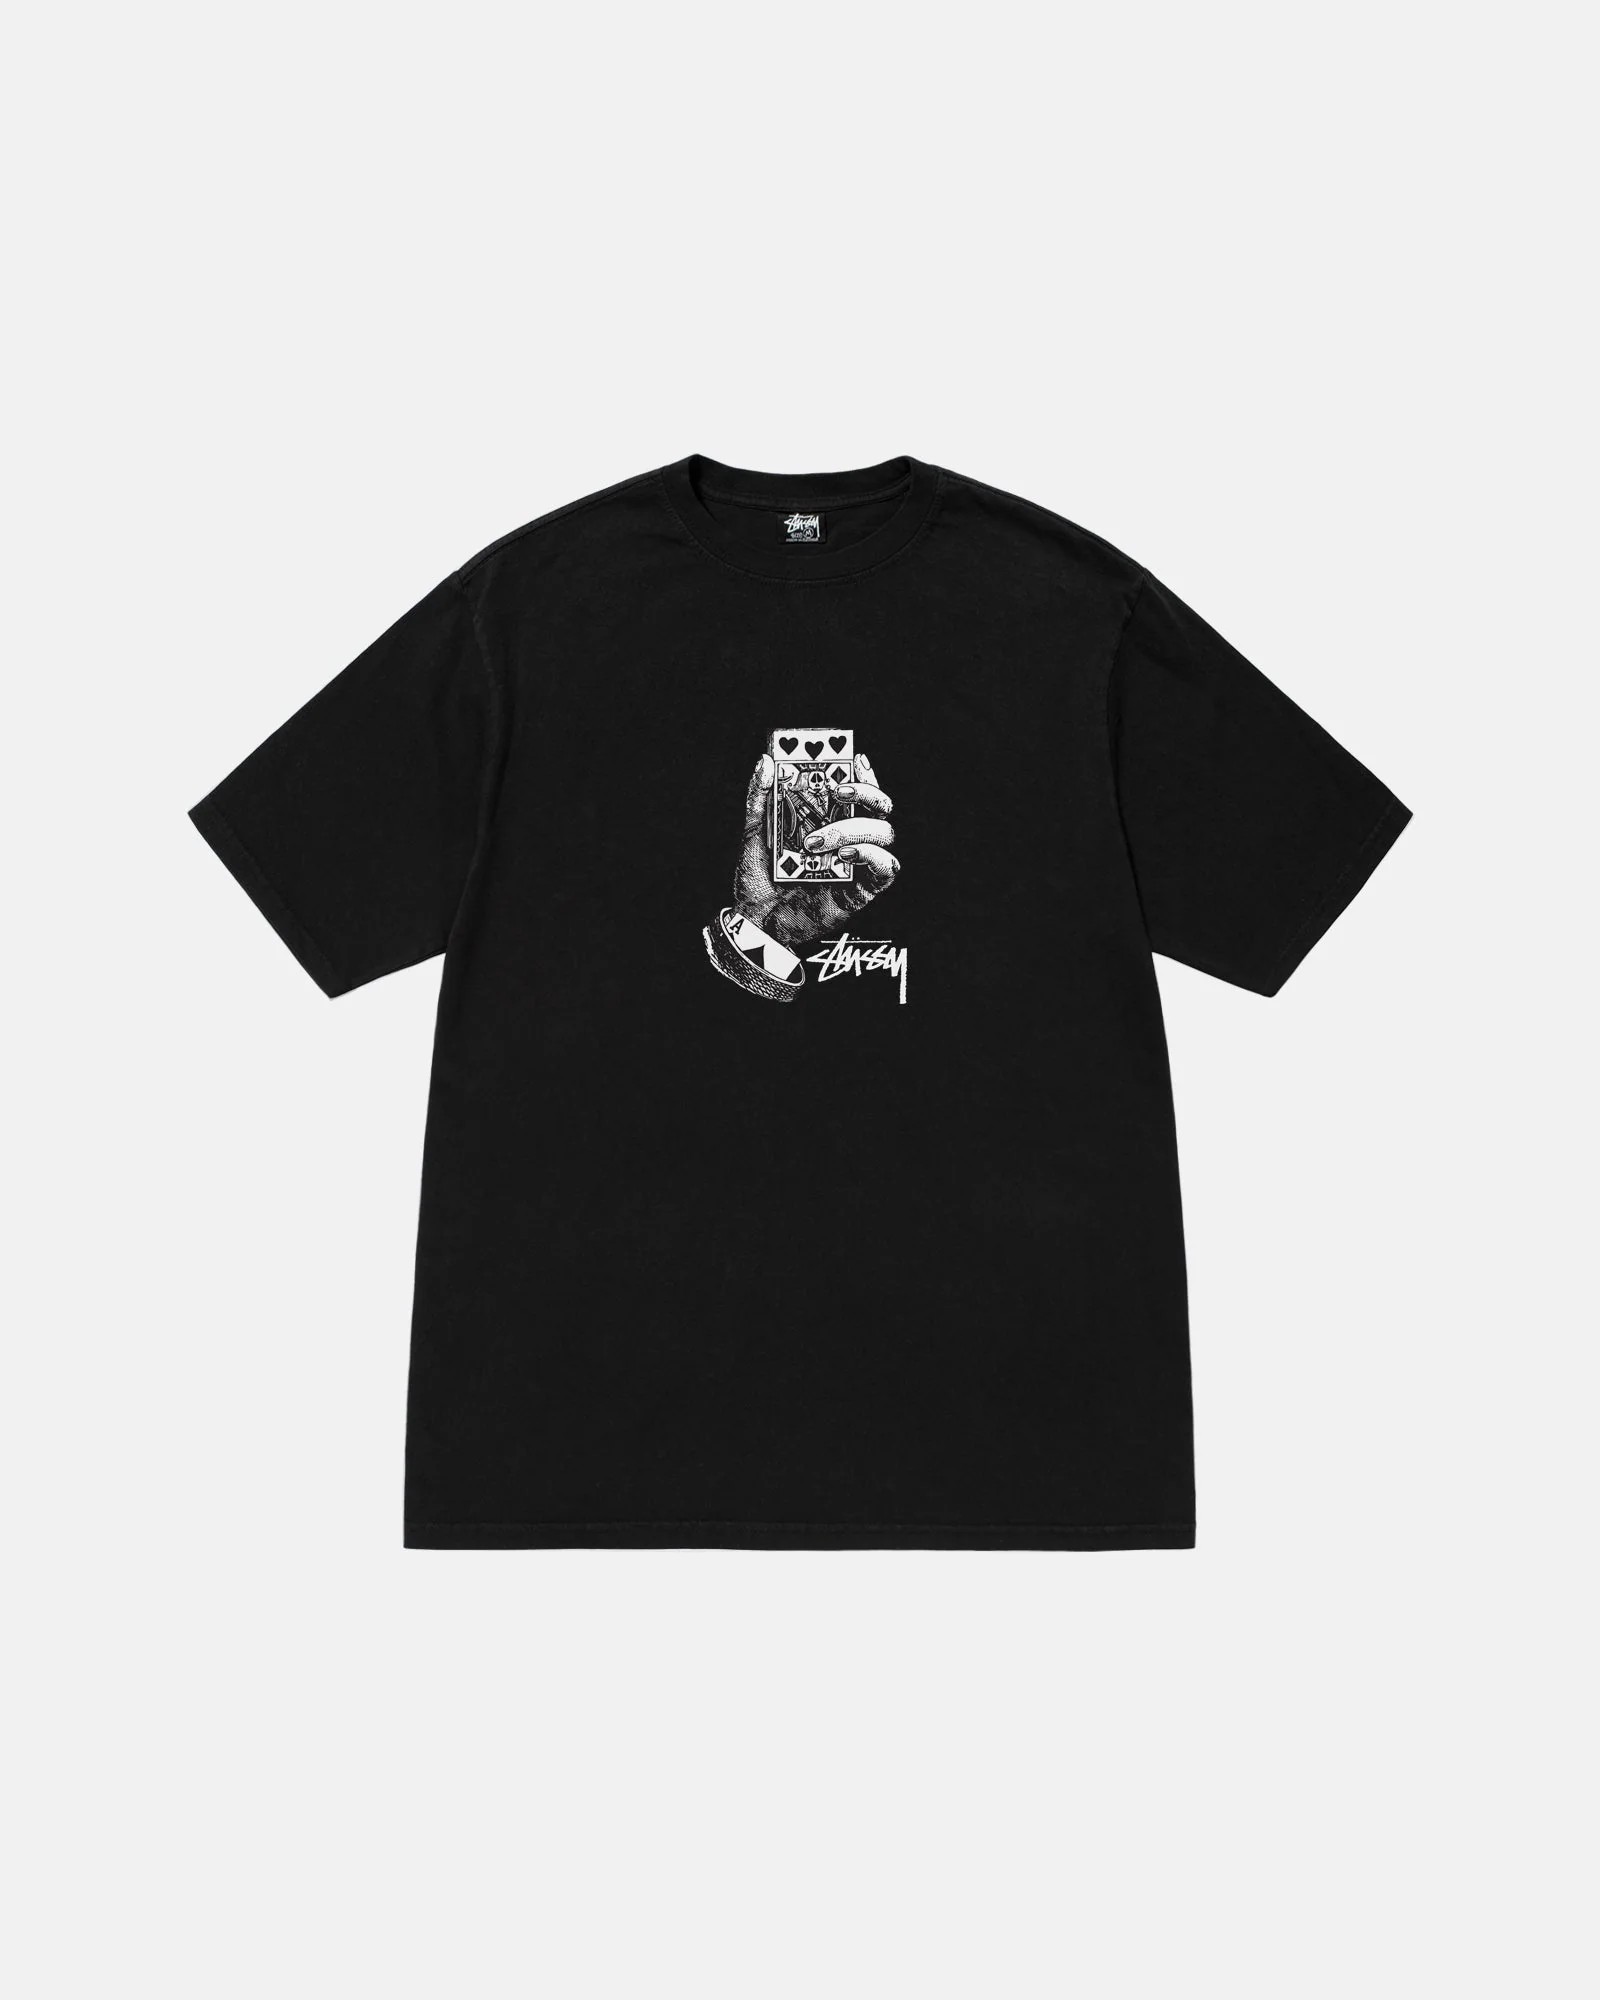 Stüssy All Bets Off Tee